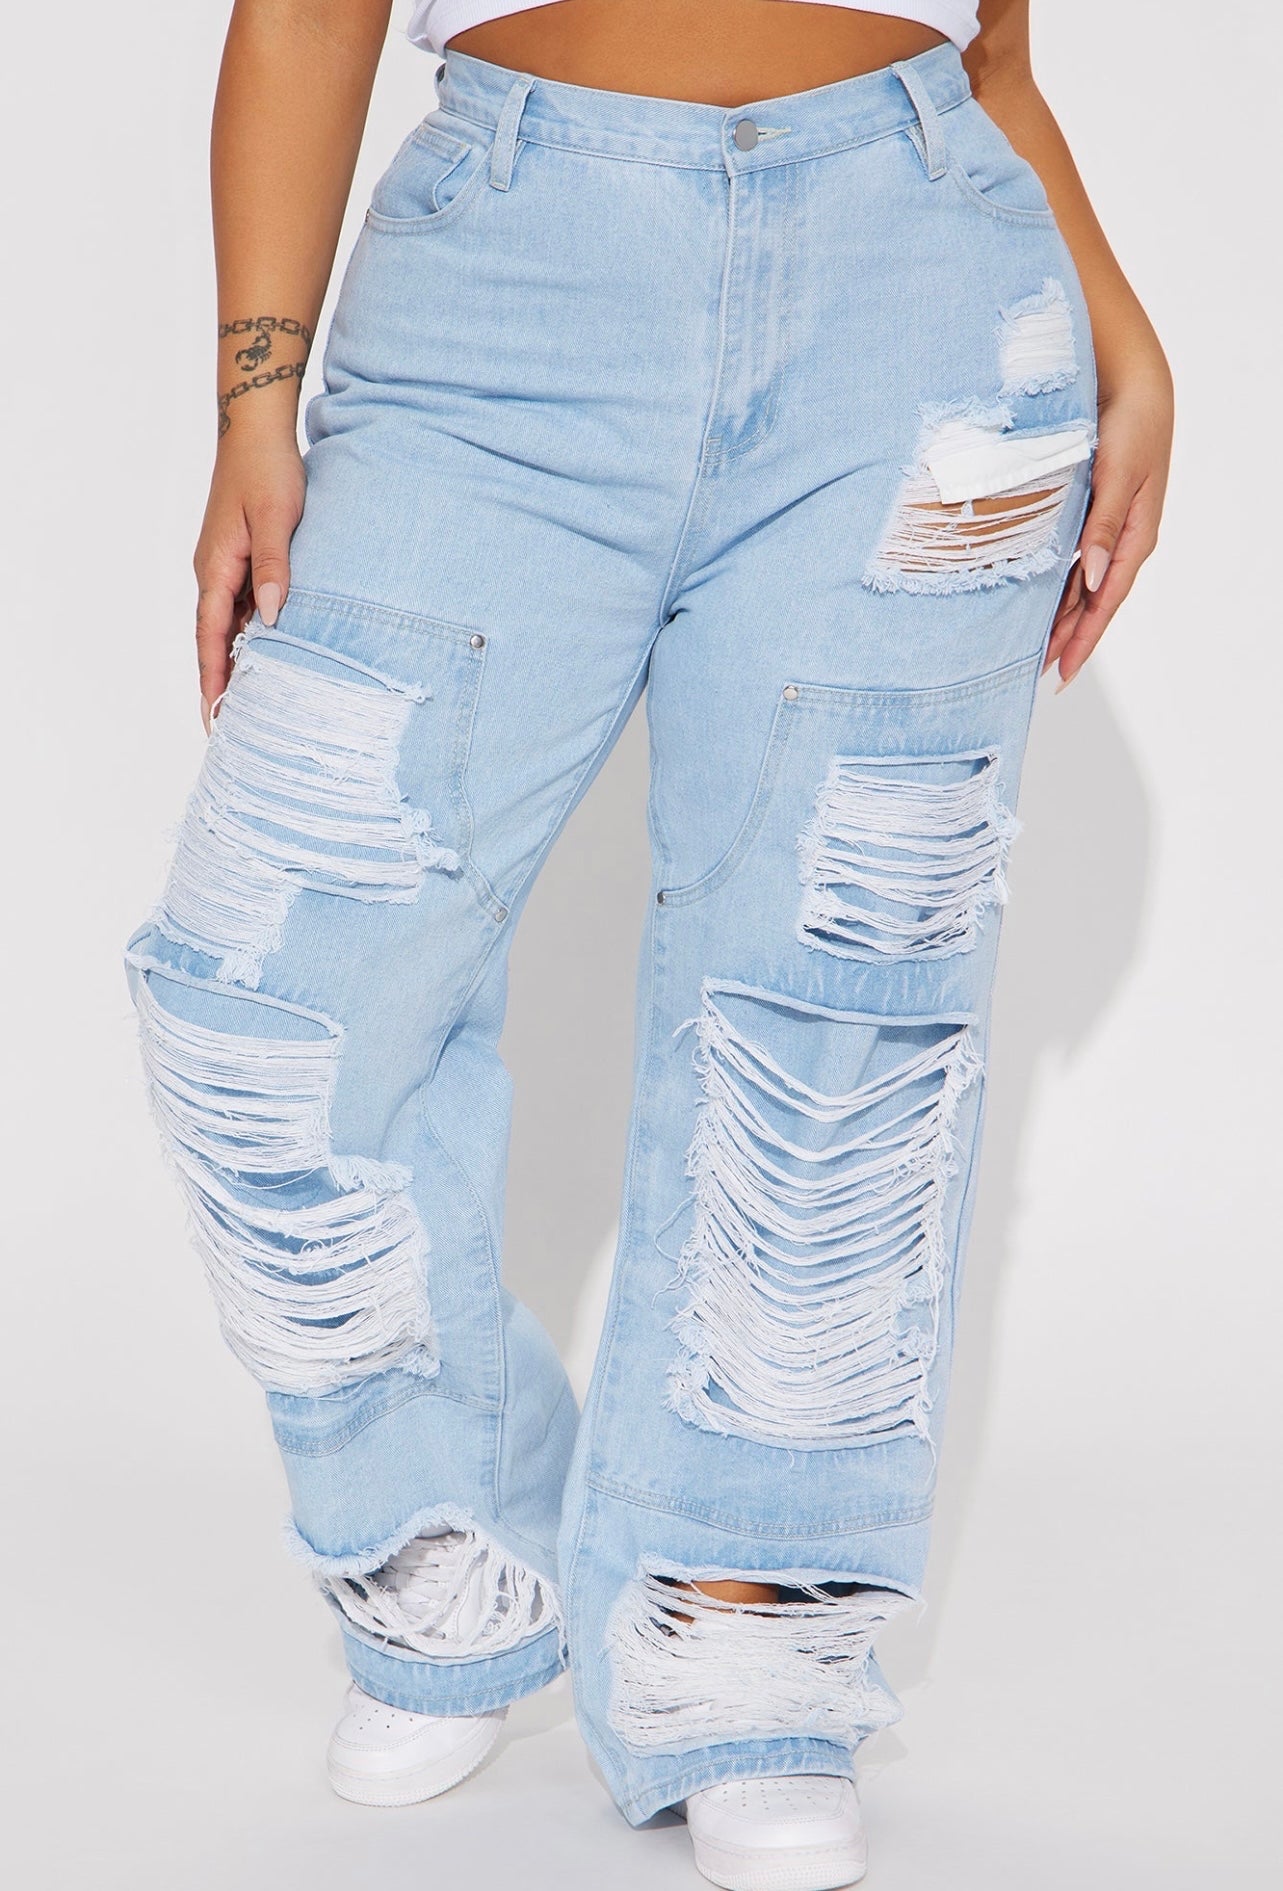 Way with Words Ripped Jeans